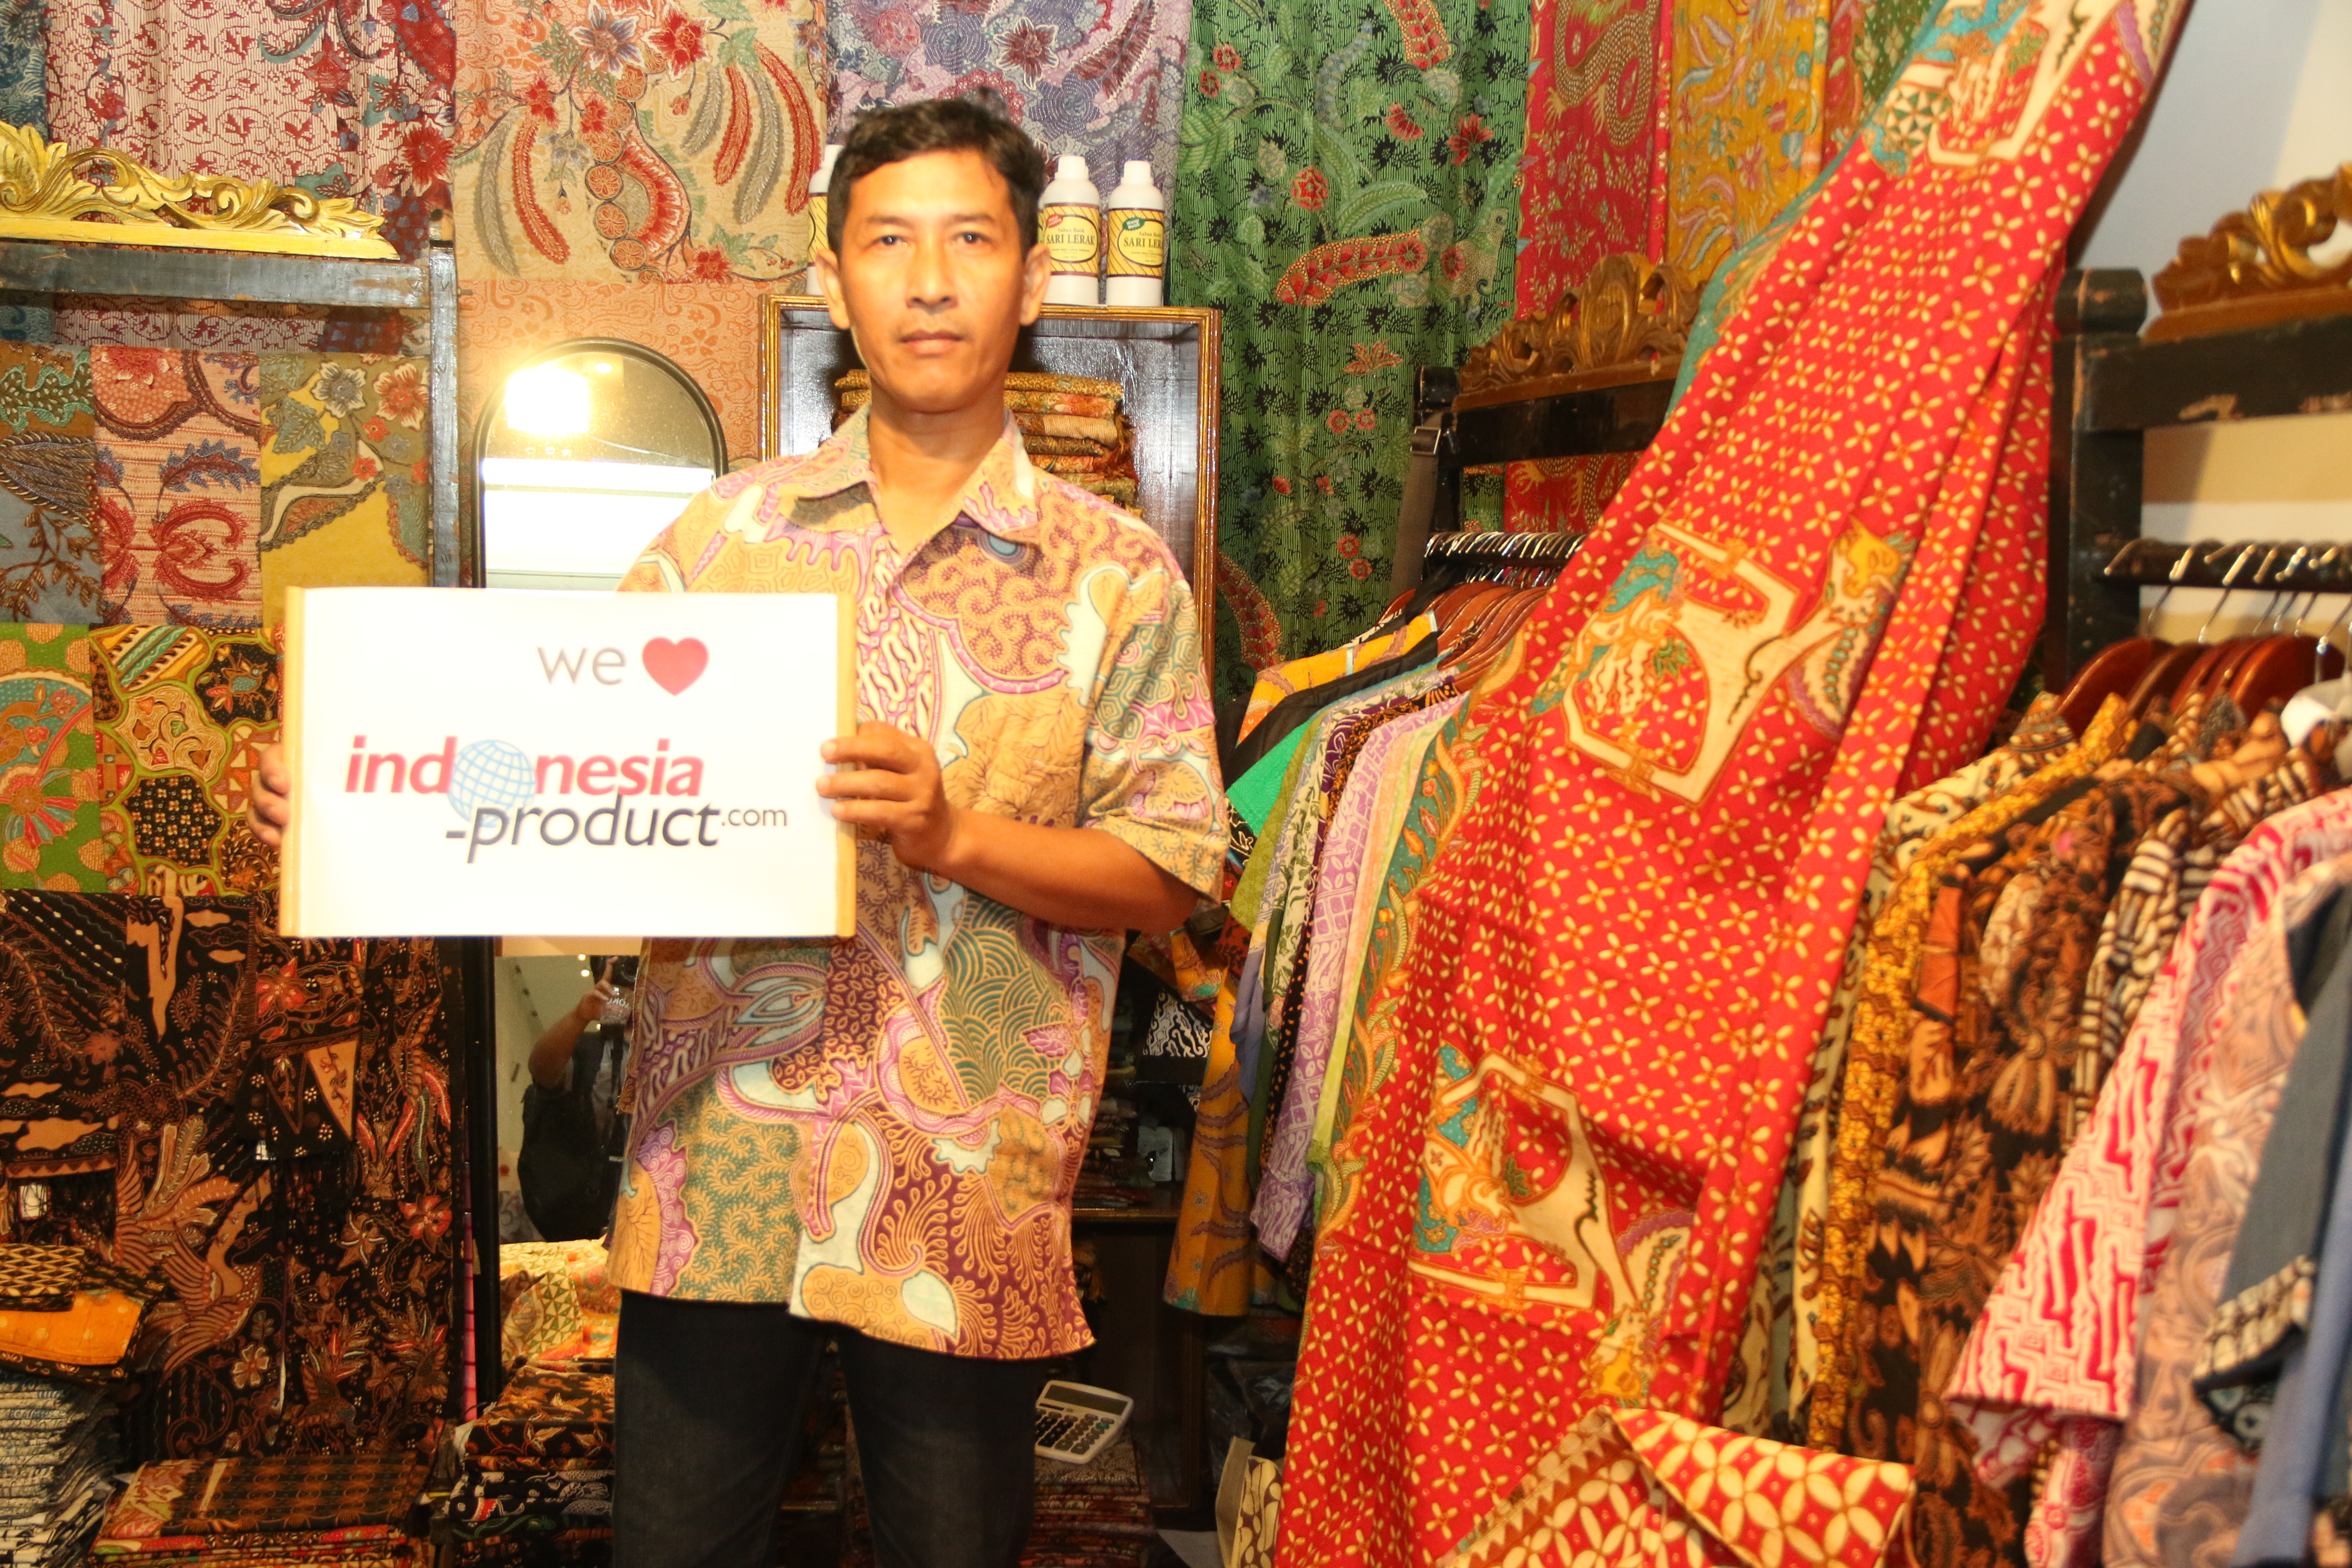 Moro Dadi Batik supplies not only variety clothes like shirt for man and woman, but also fabric products with various ethnic and beautiful motifs